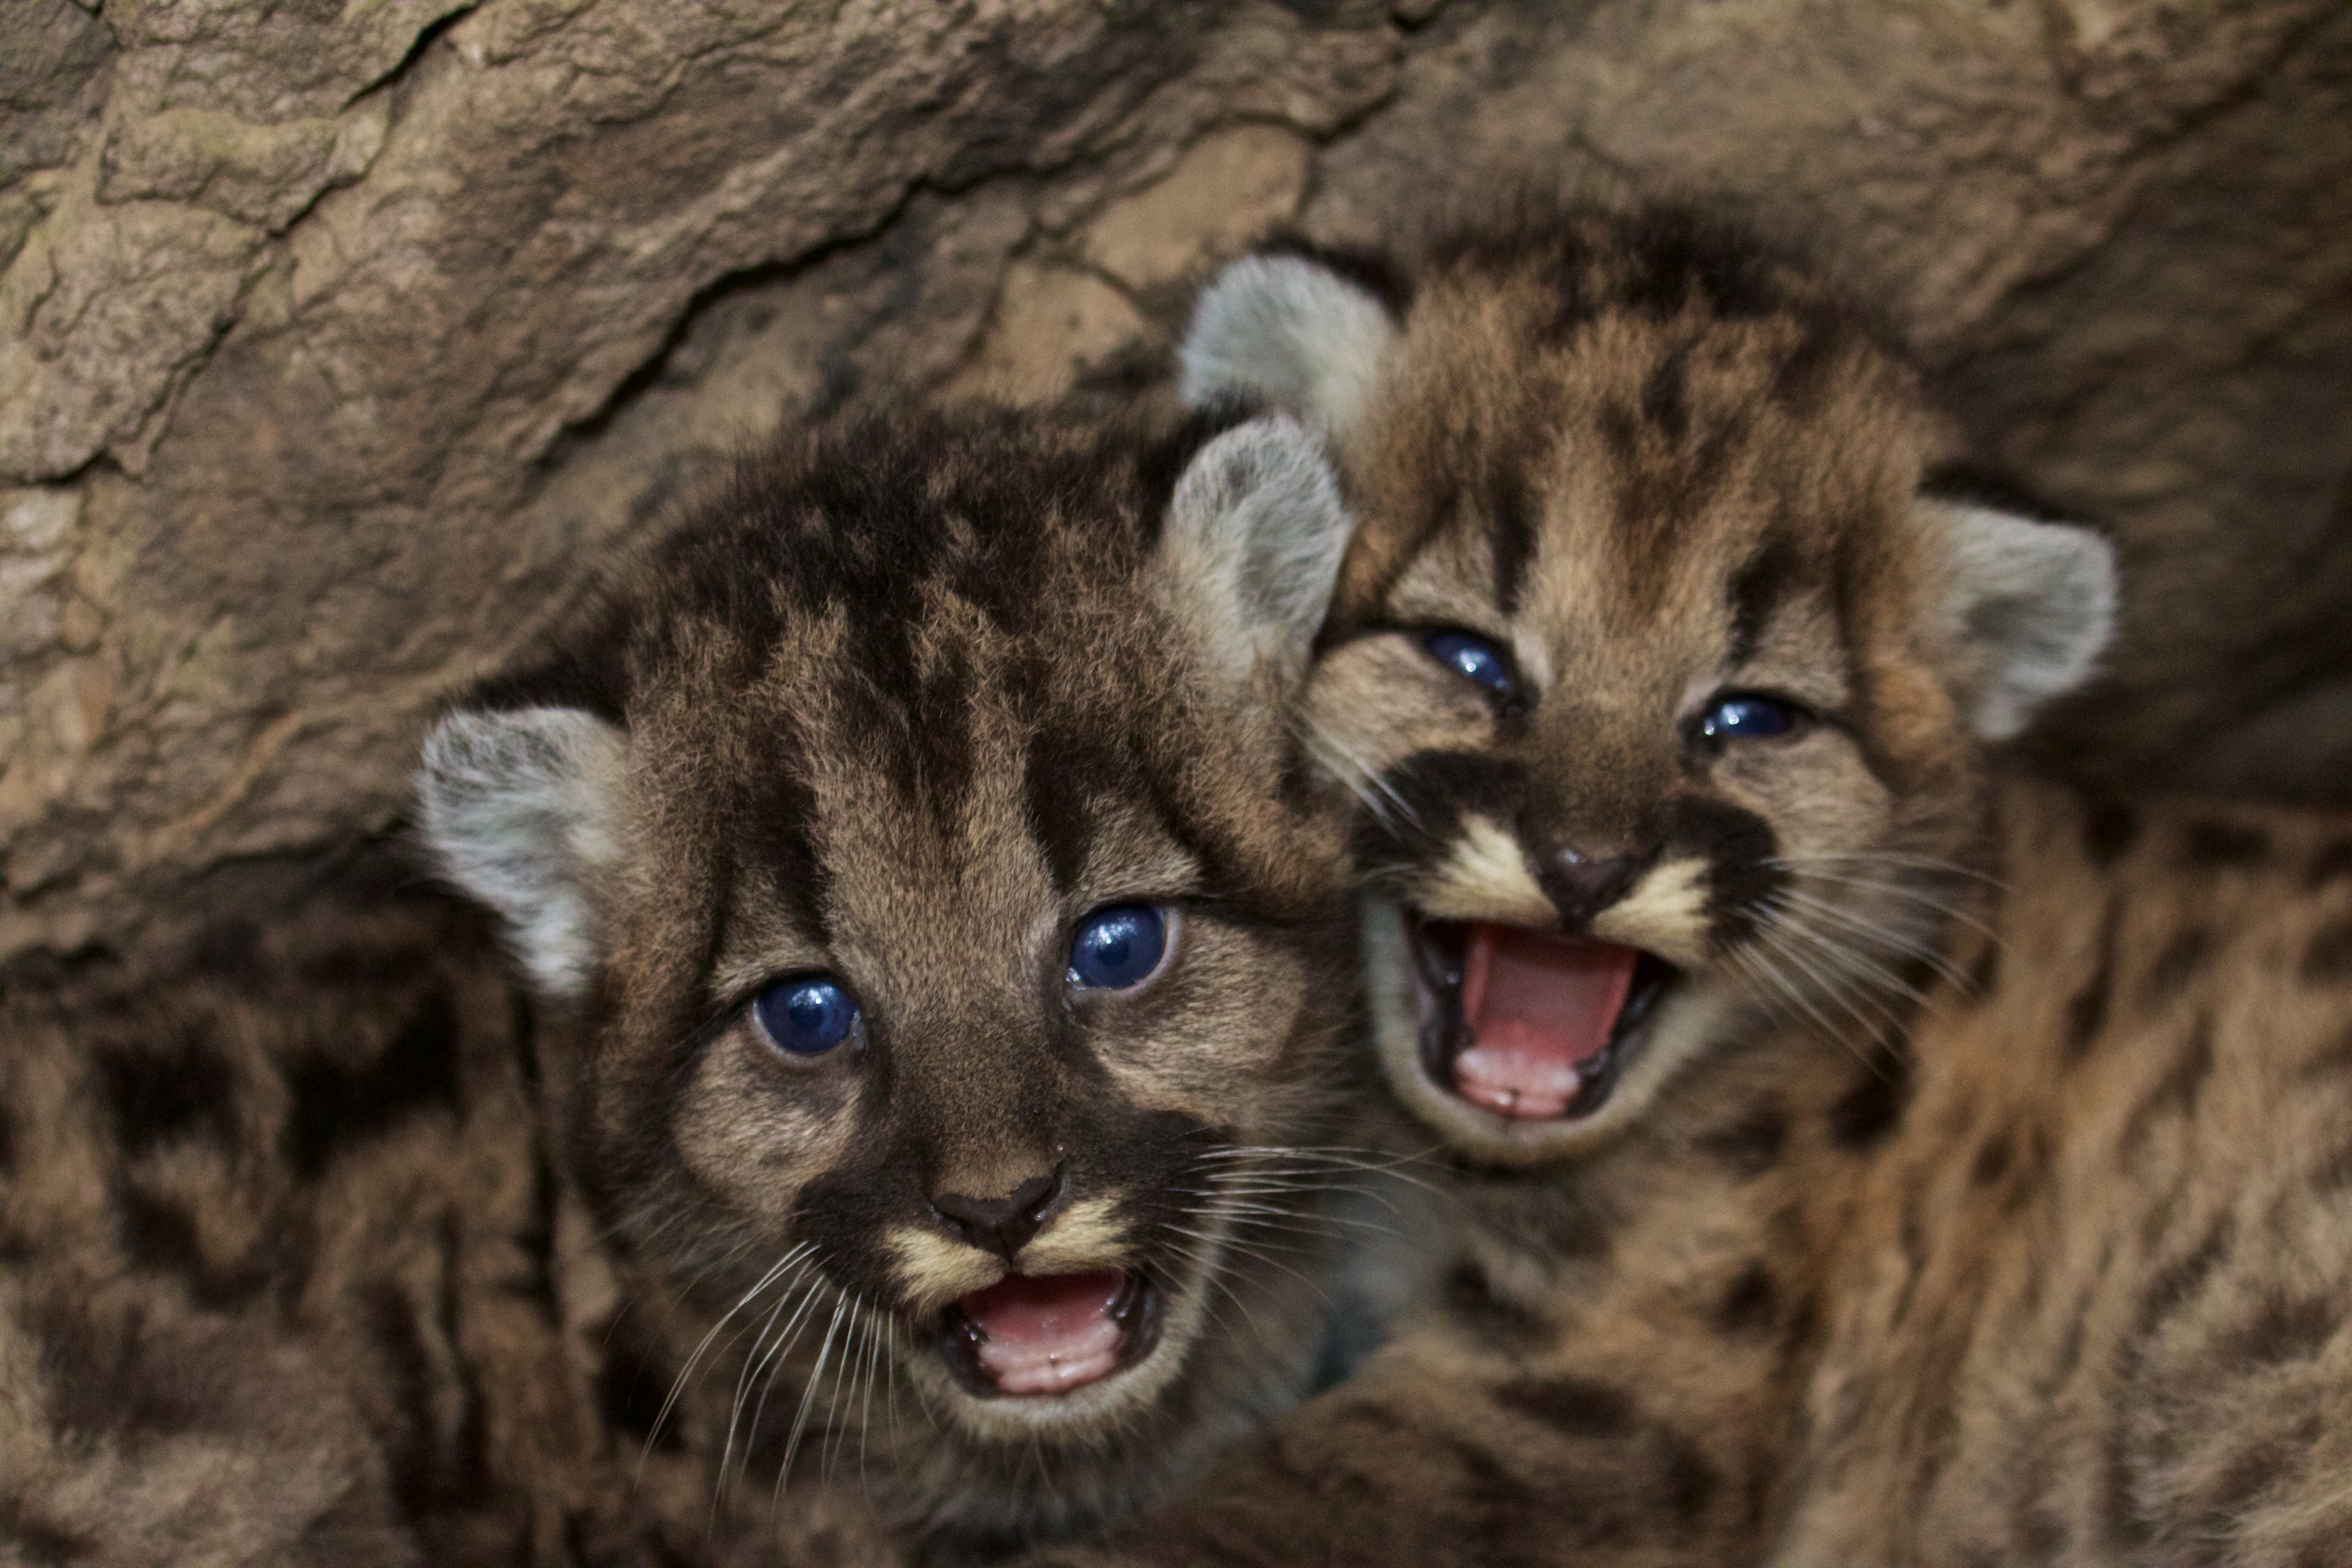 P-46 (female) and P-47 (male) are the newest members of the National Park Service mountain lion study. Courtesy of the National Park Service.